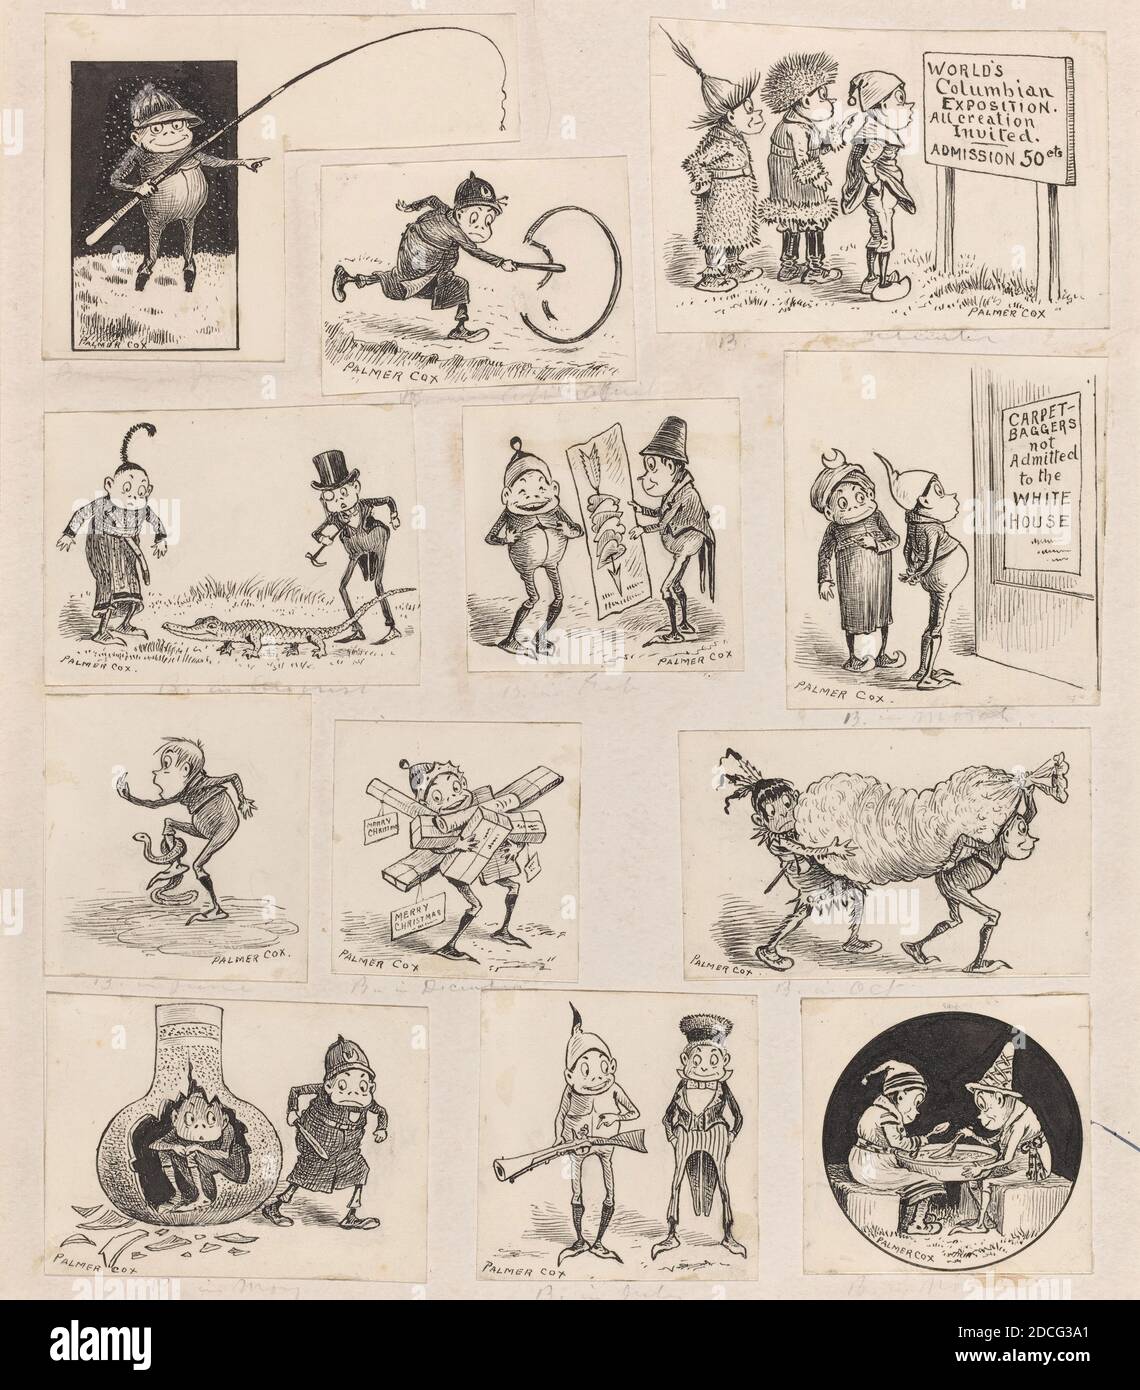 Palmer Cox, (artist), Canadian, 1840 - 1924, Brownies at Home - Twelve Vignettes, c. 1893, pen and black ink on twelve pieces of wove paper, support: 33.2 x 28 cm (13 1/16 x 11 in Stock Photo